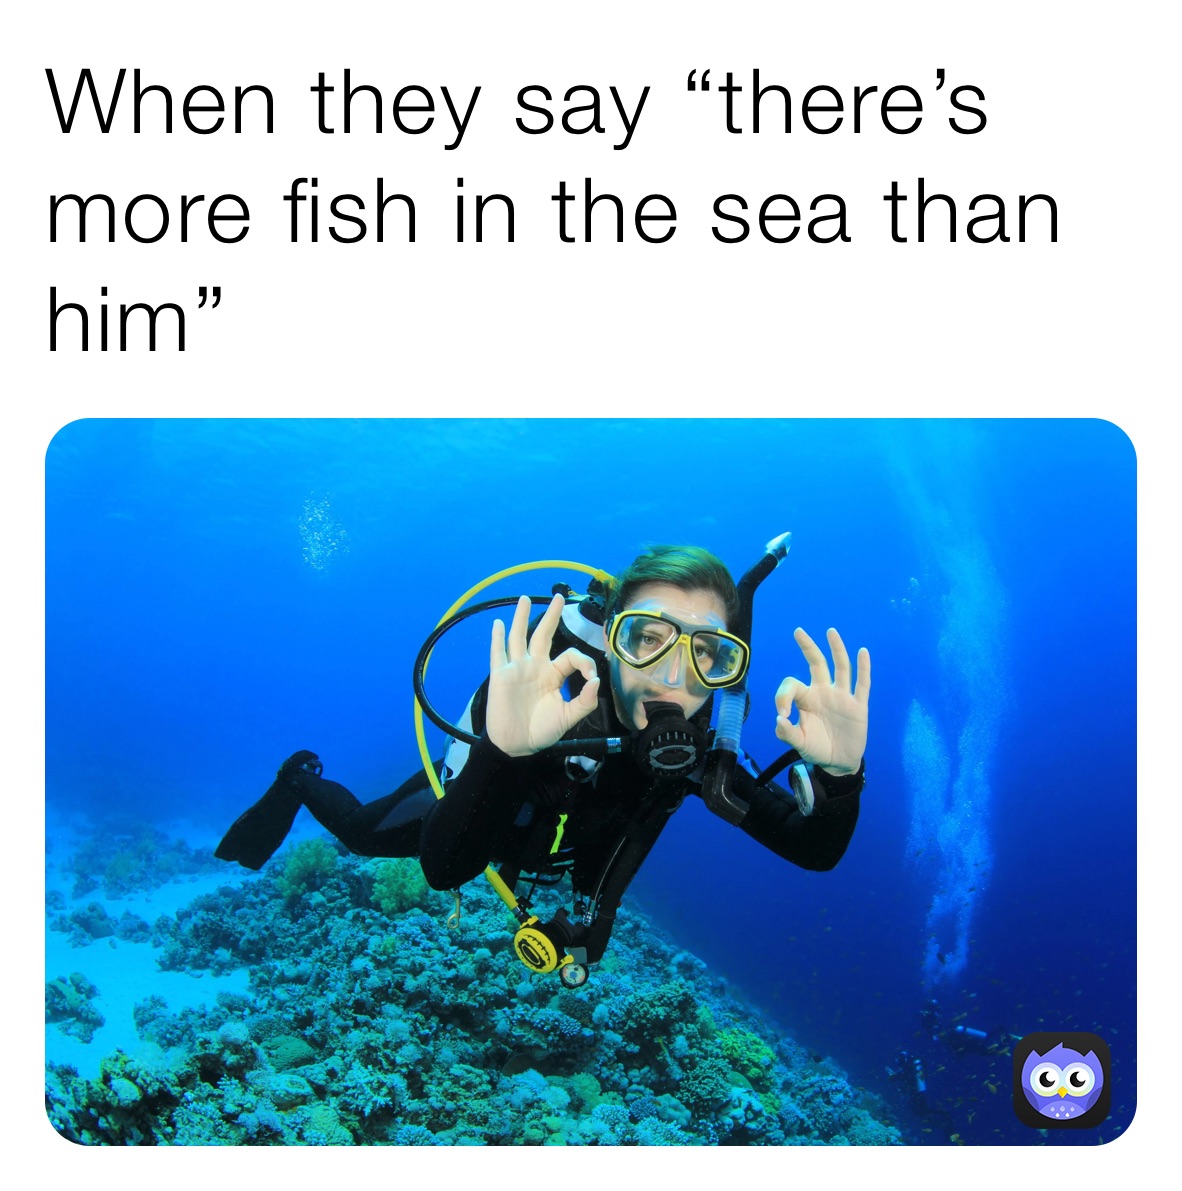 When they say “there’s more fish in the sea than him”